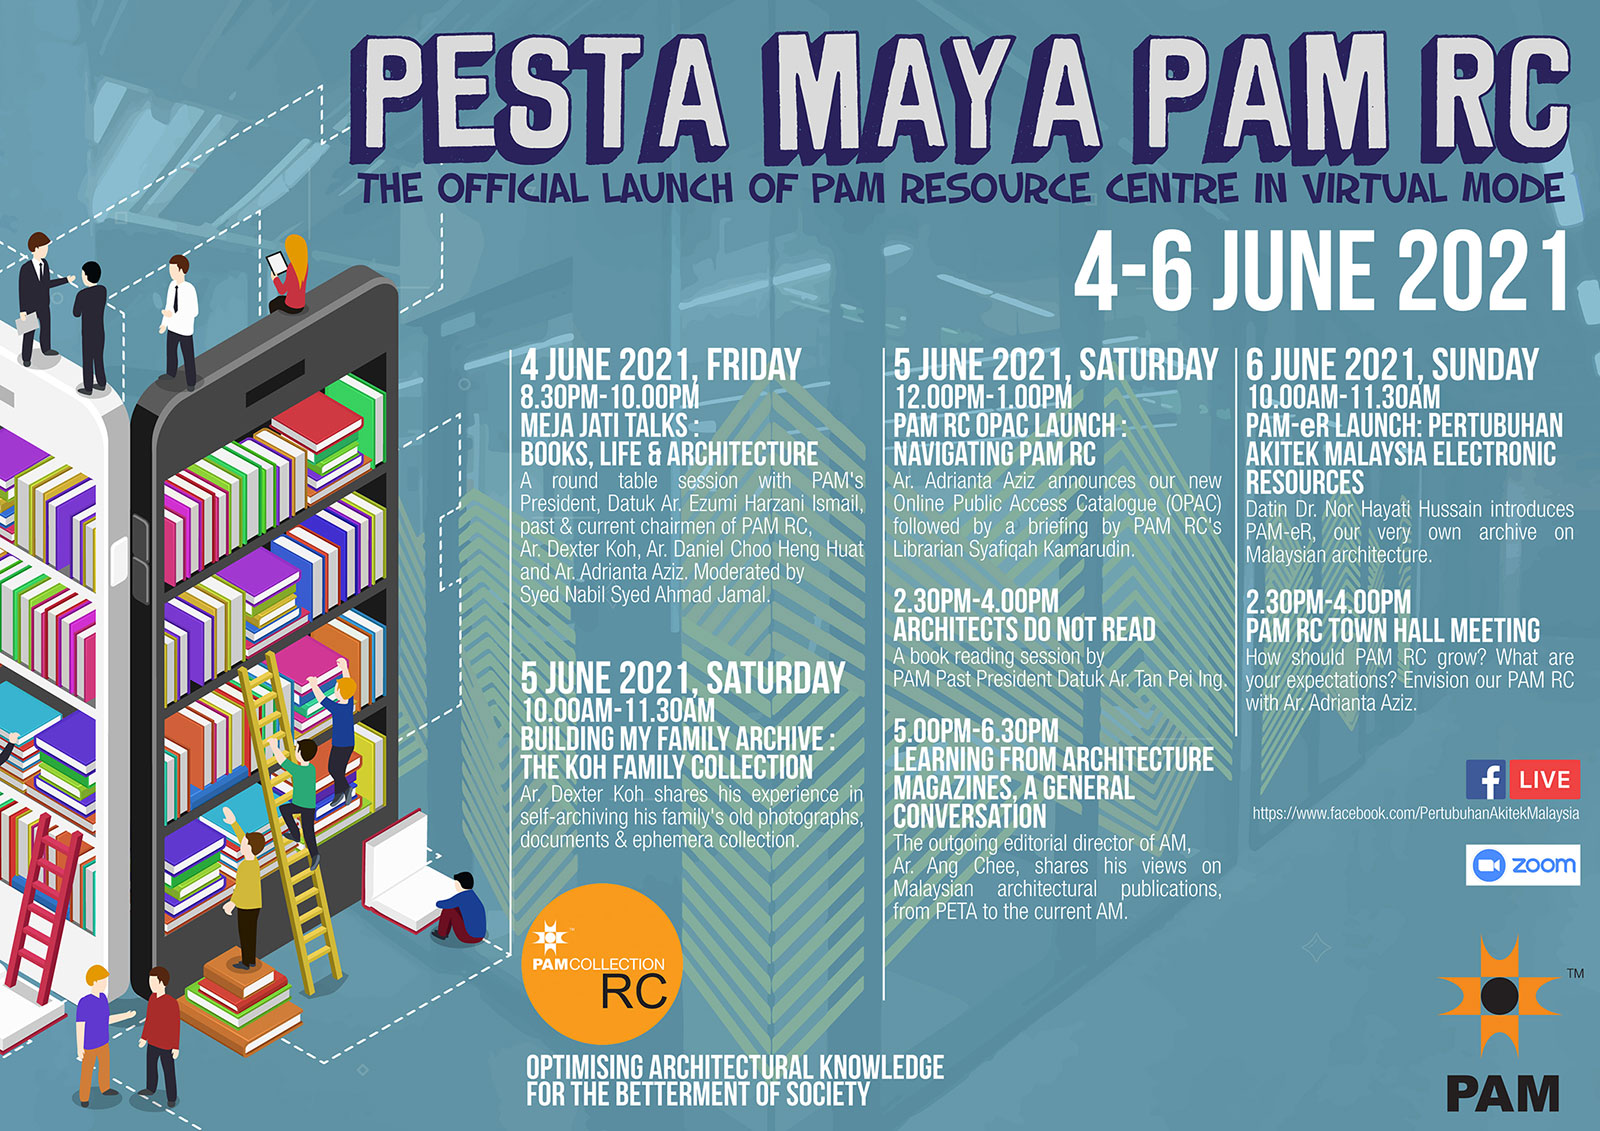 PESTA MAYA PAM RC: THE OFFICIAL LAUNCH OF PAM RESOURCE CENTRE IN VIRTUAL MODE